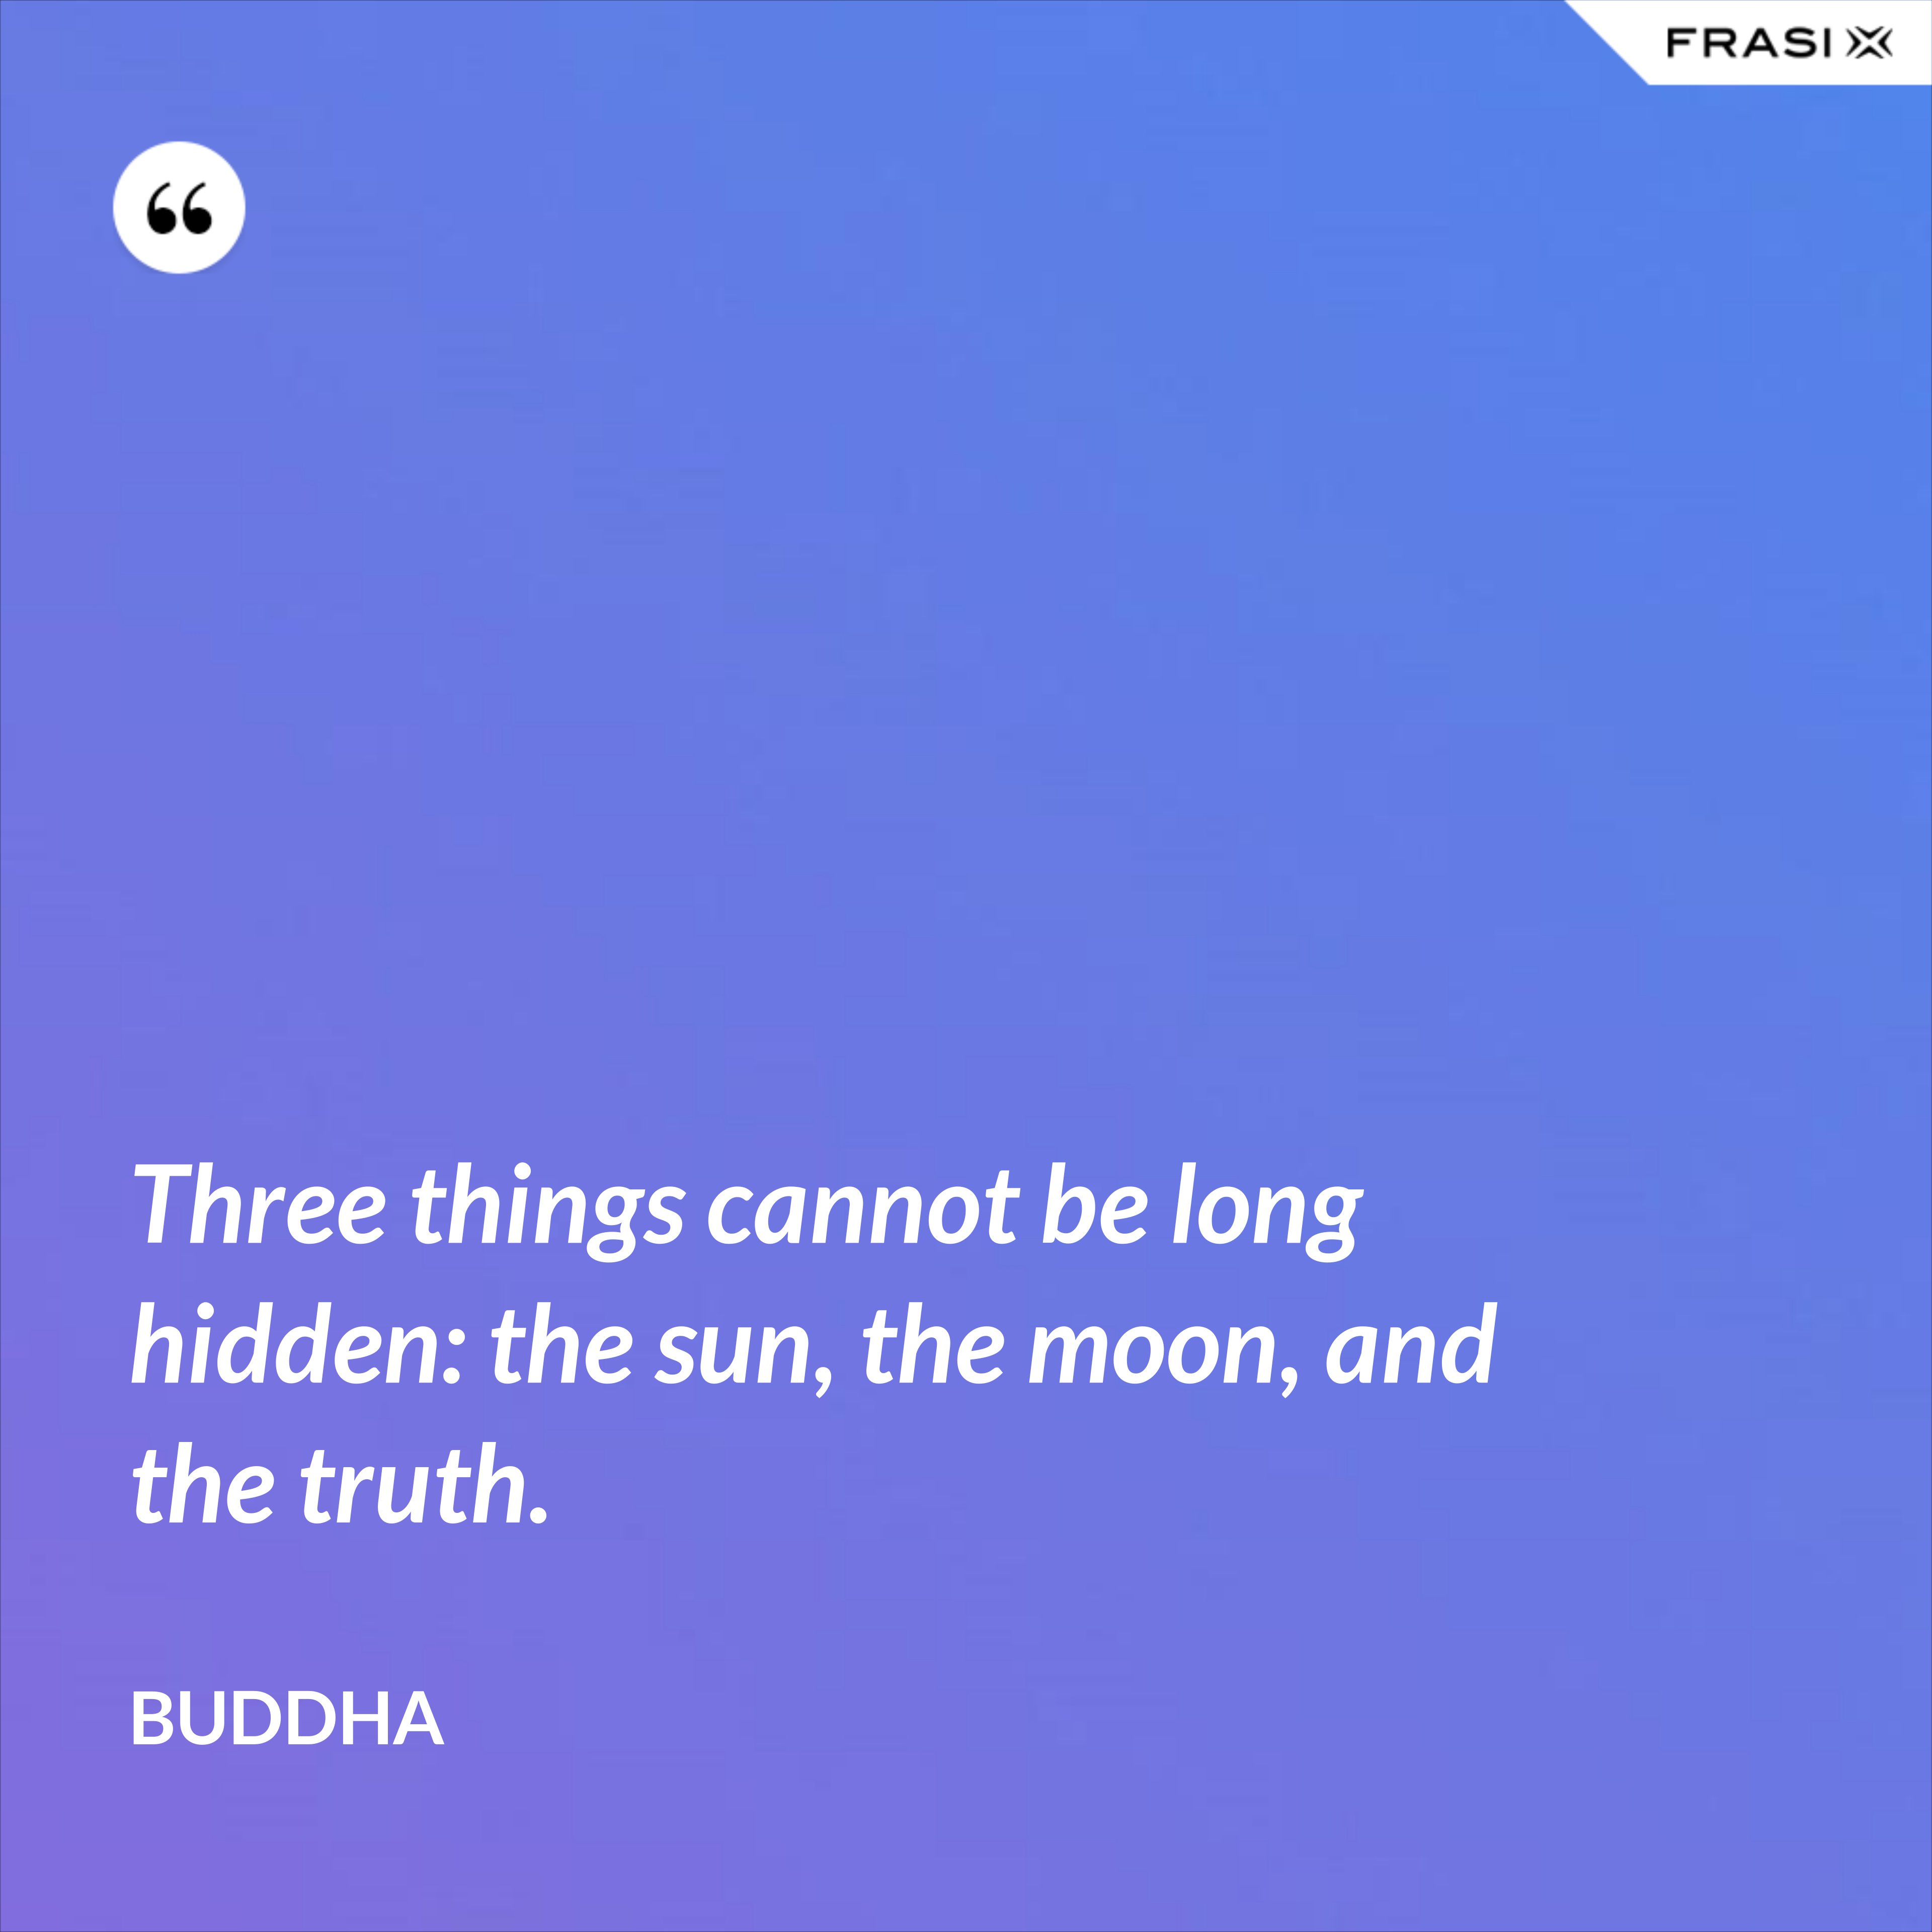 Three things cannot be long hidden: the sun, the moon, and the truth. - Buddha